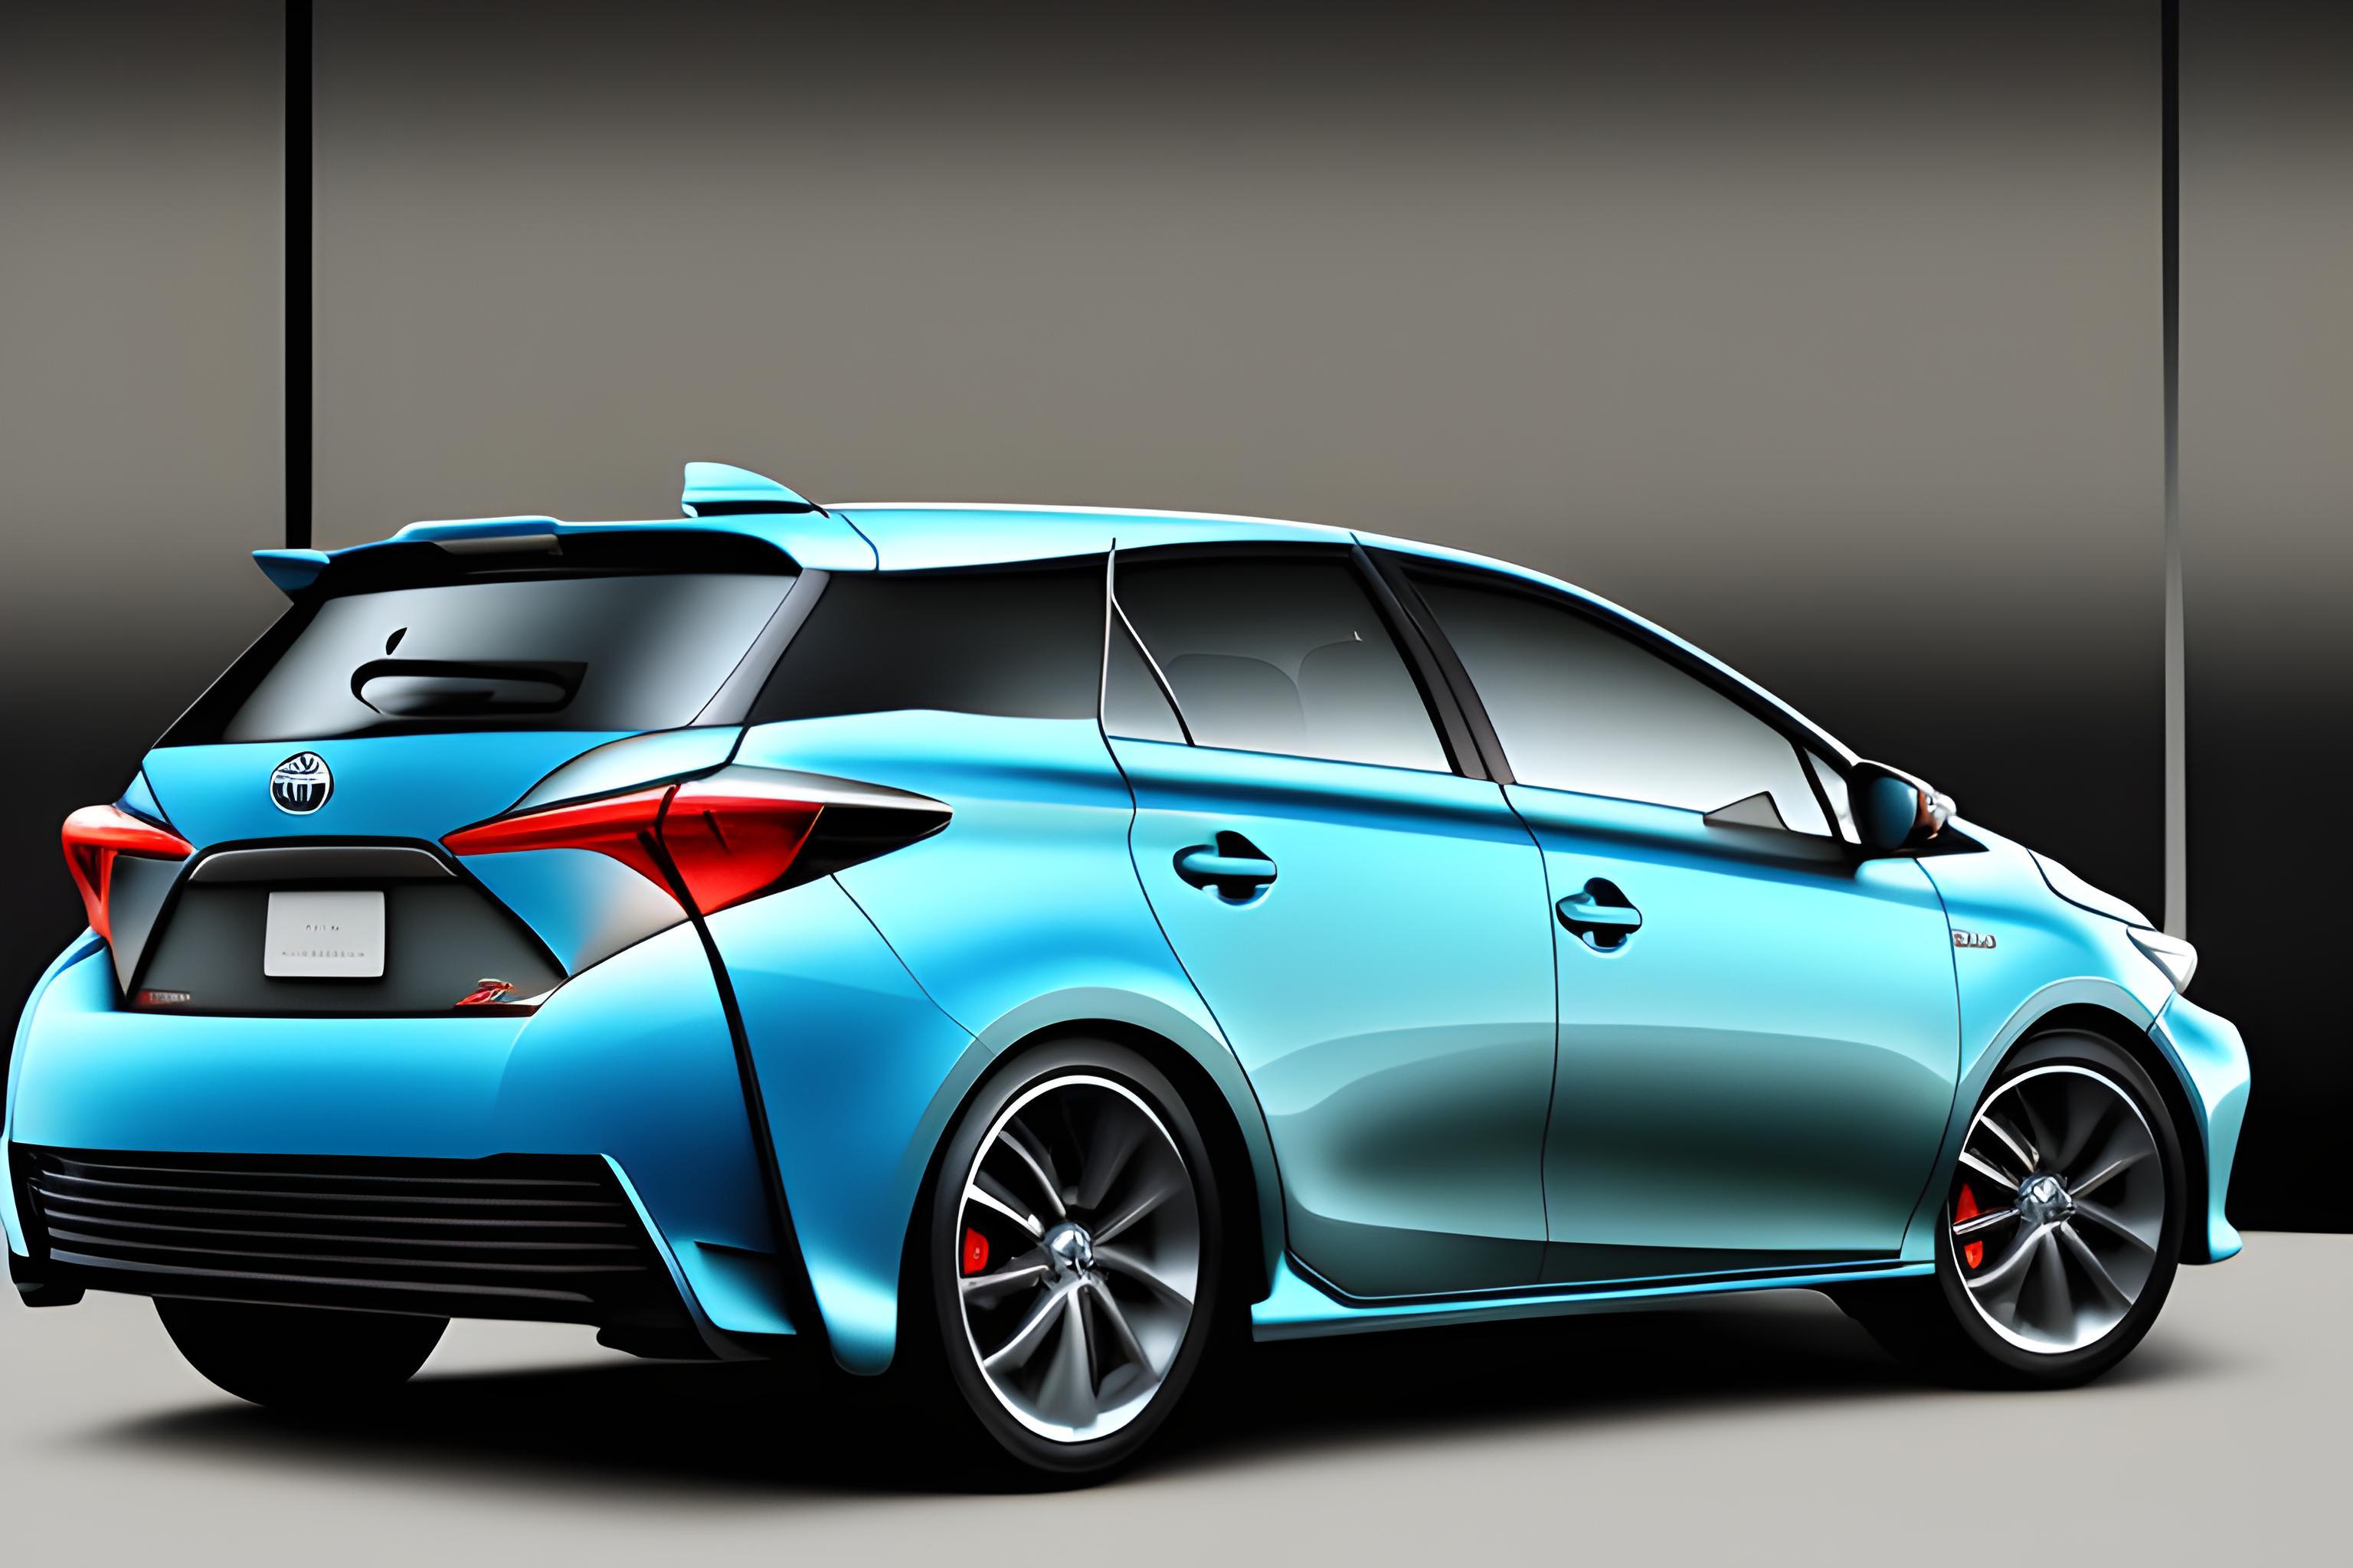 The Toyota Auris Is A Modern And Stylish Car That Stands Out